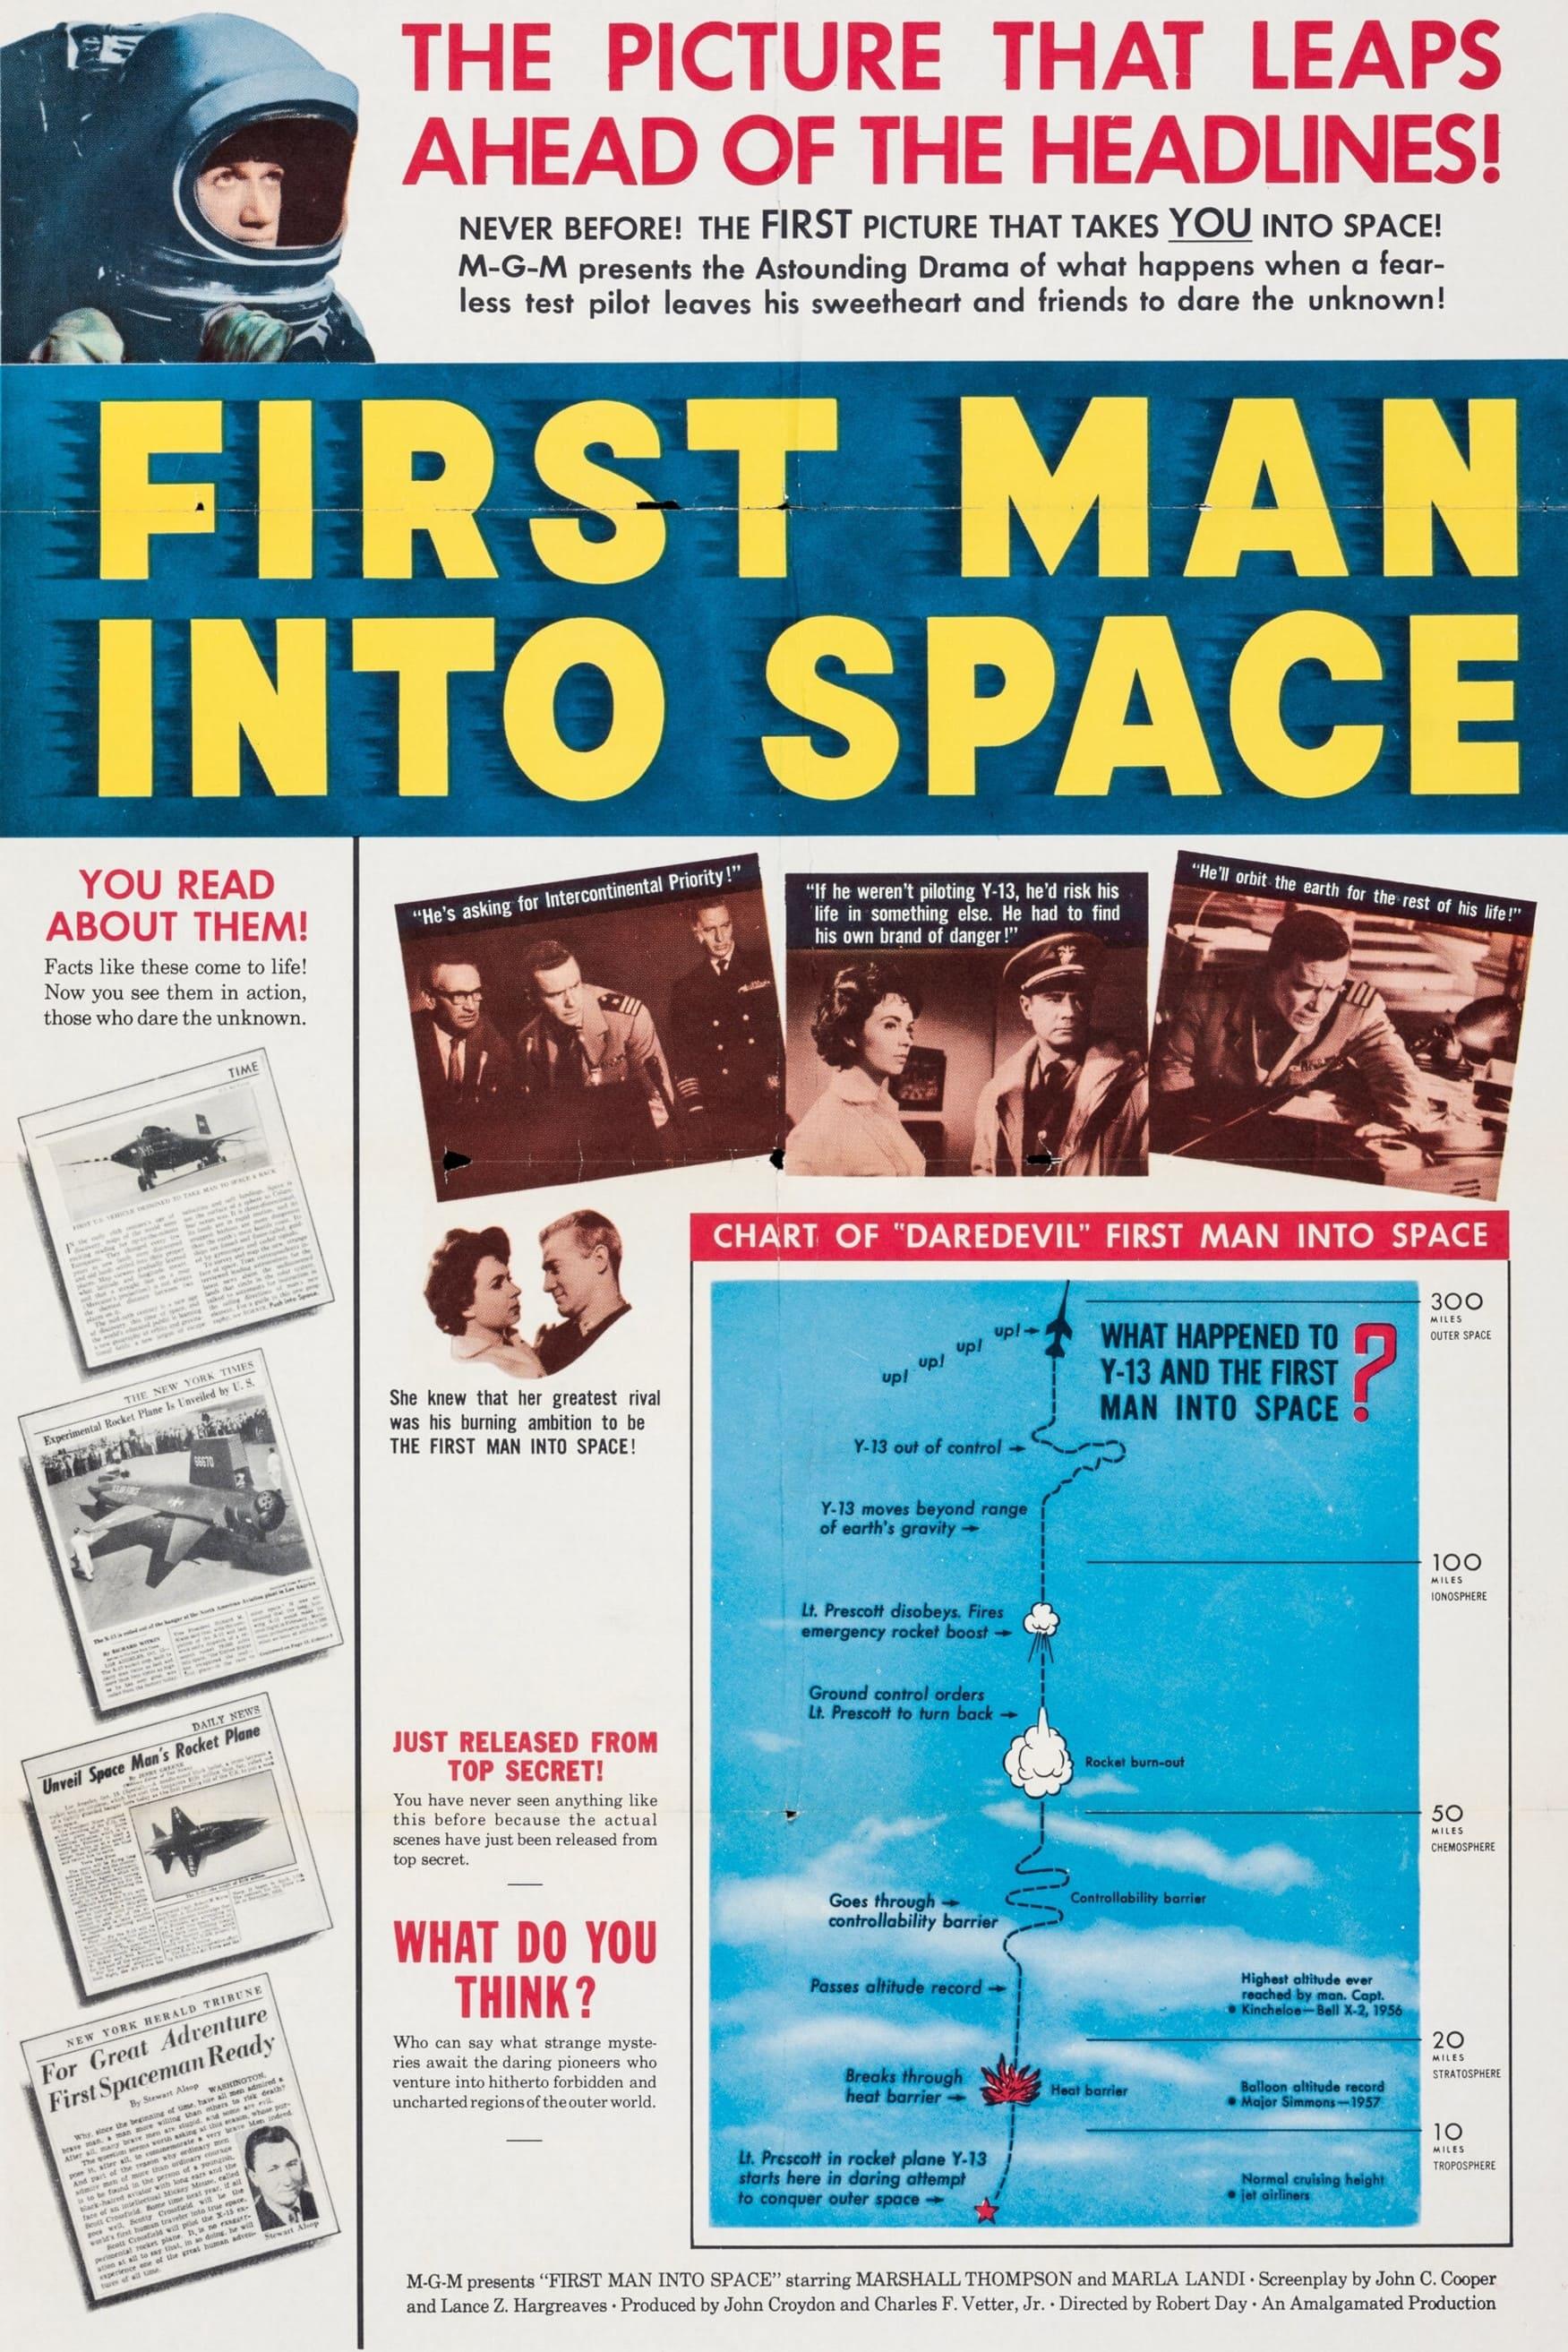 First Man into Space poster